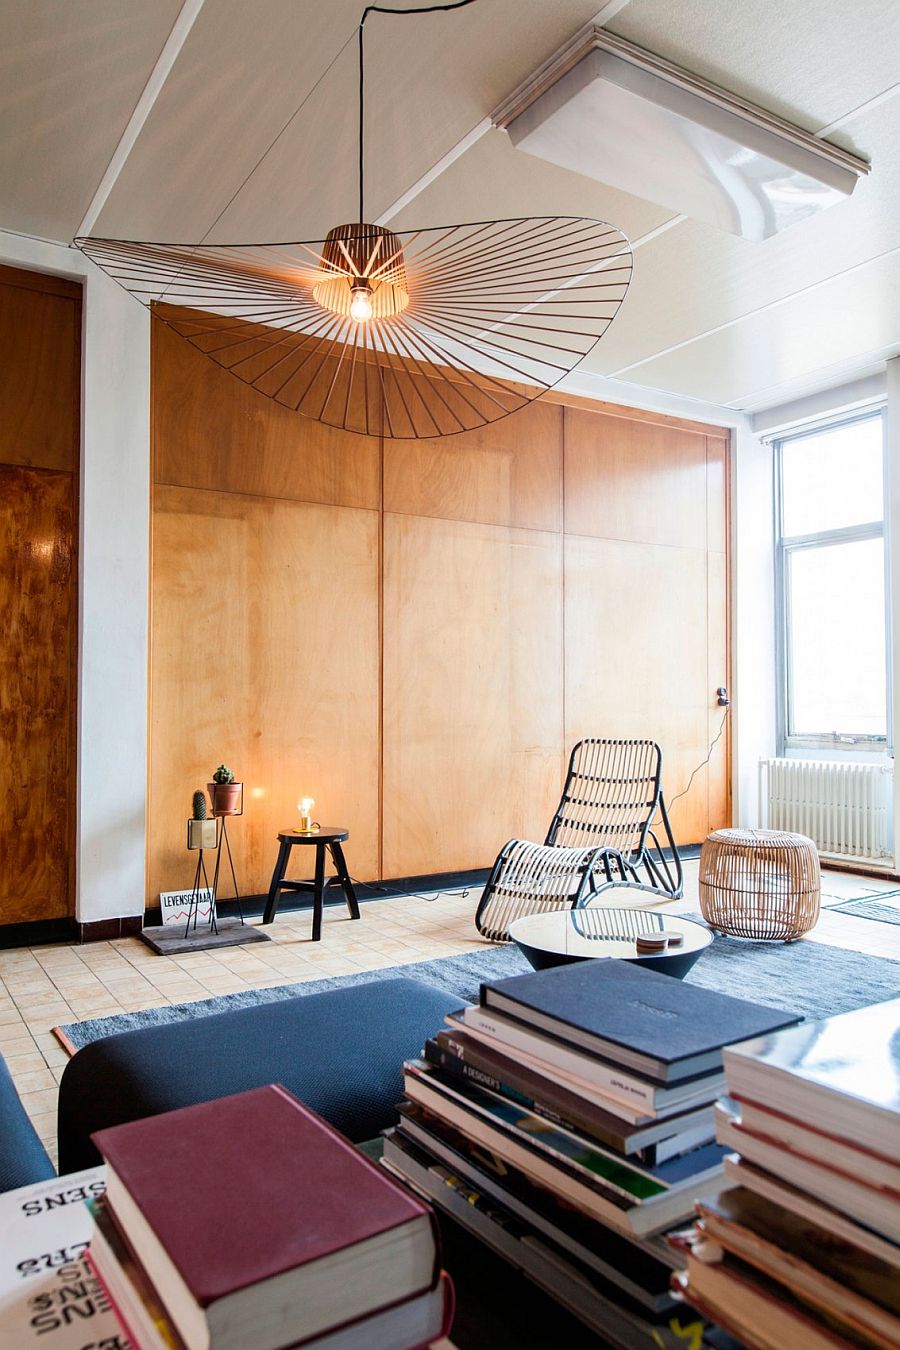 Wooden walls bring texture to the ligh-filled living space